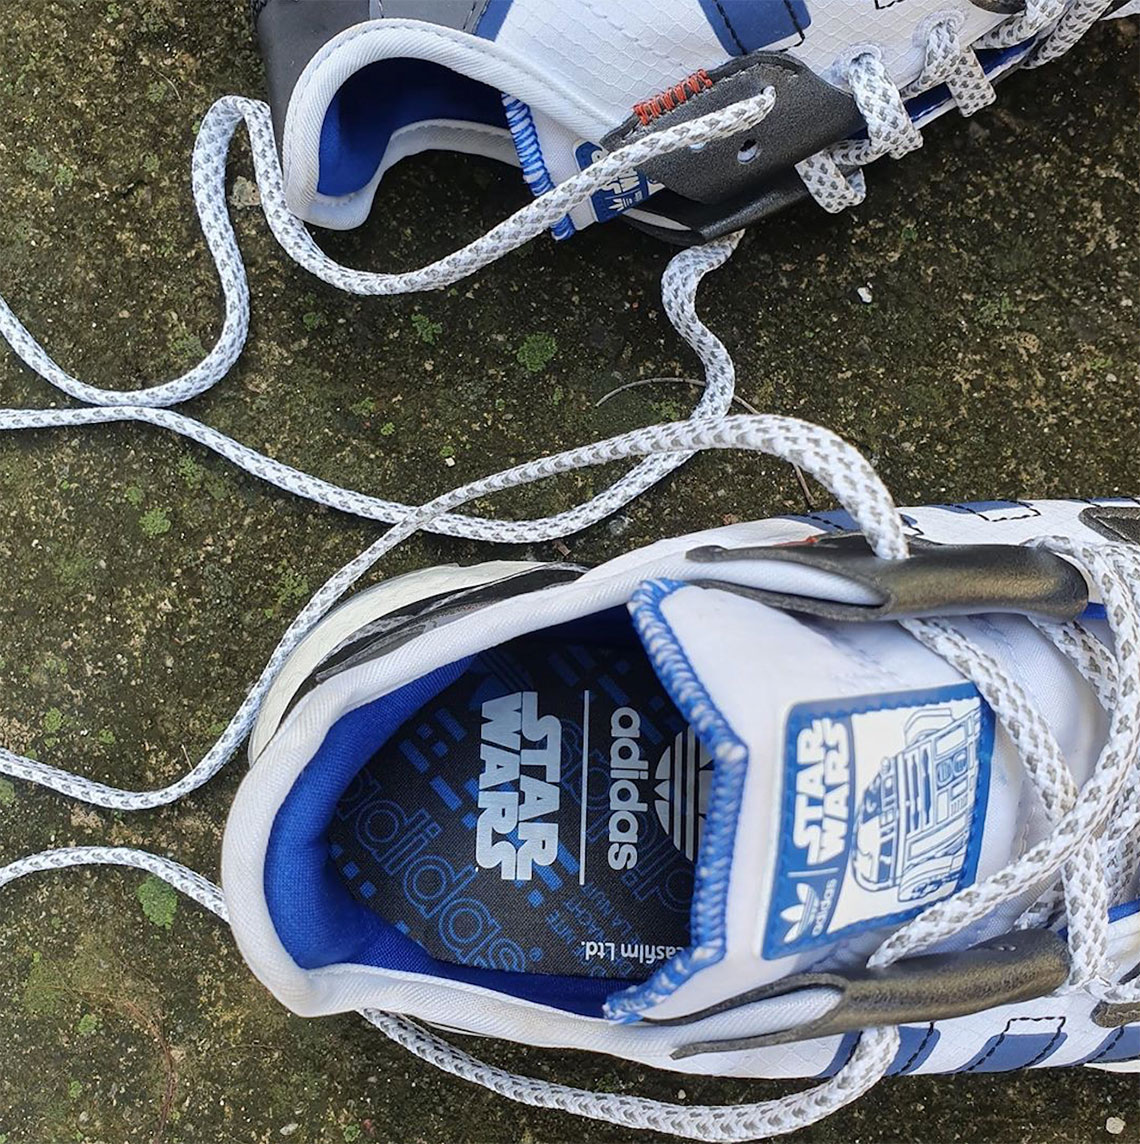 First Look At The Star Wars X Adidas Nite Jogger R2 D2 And